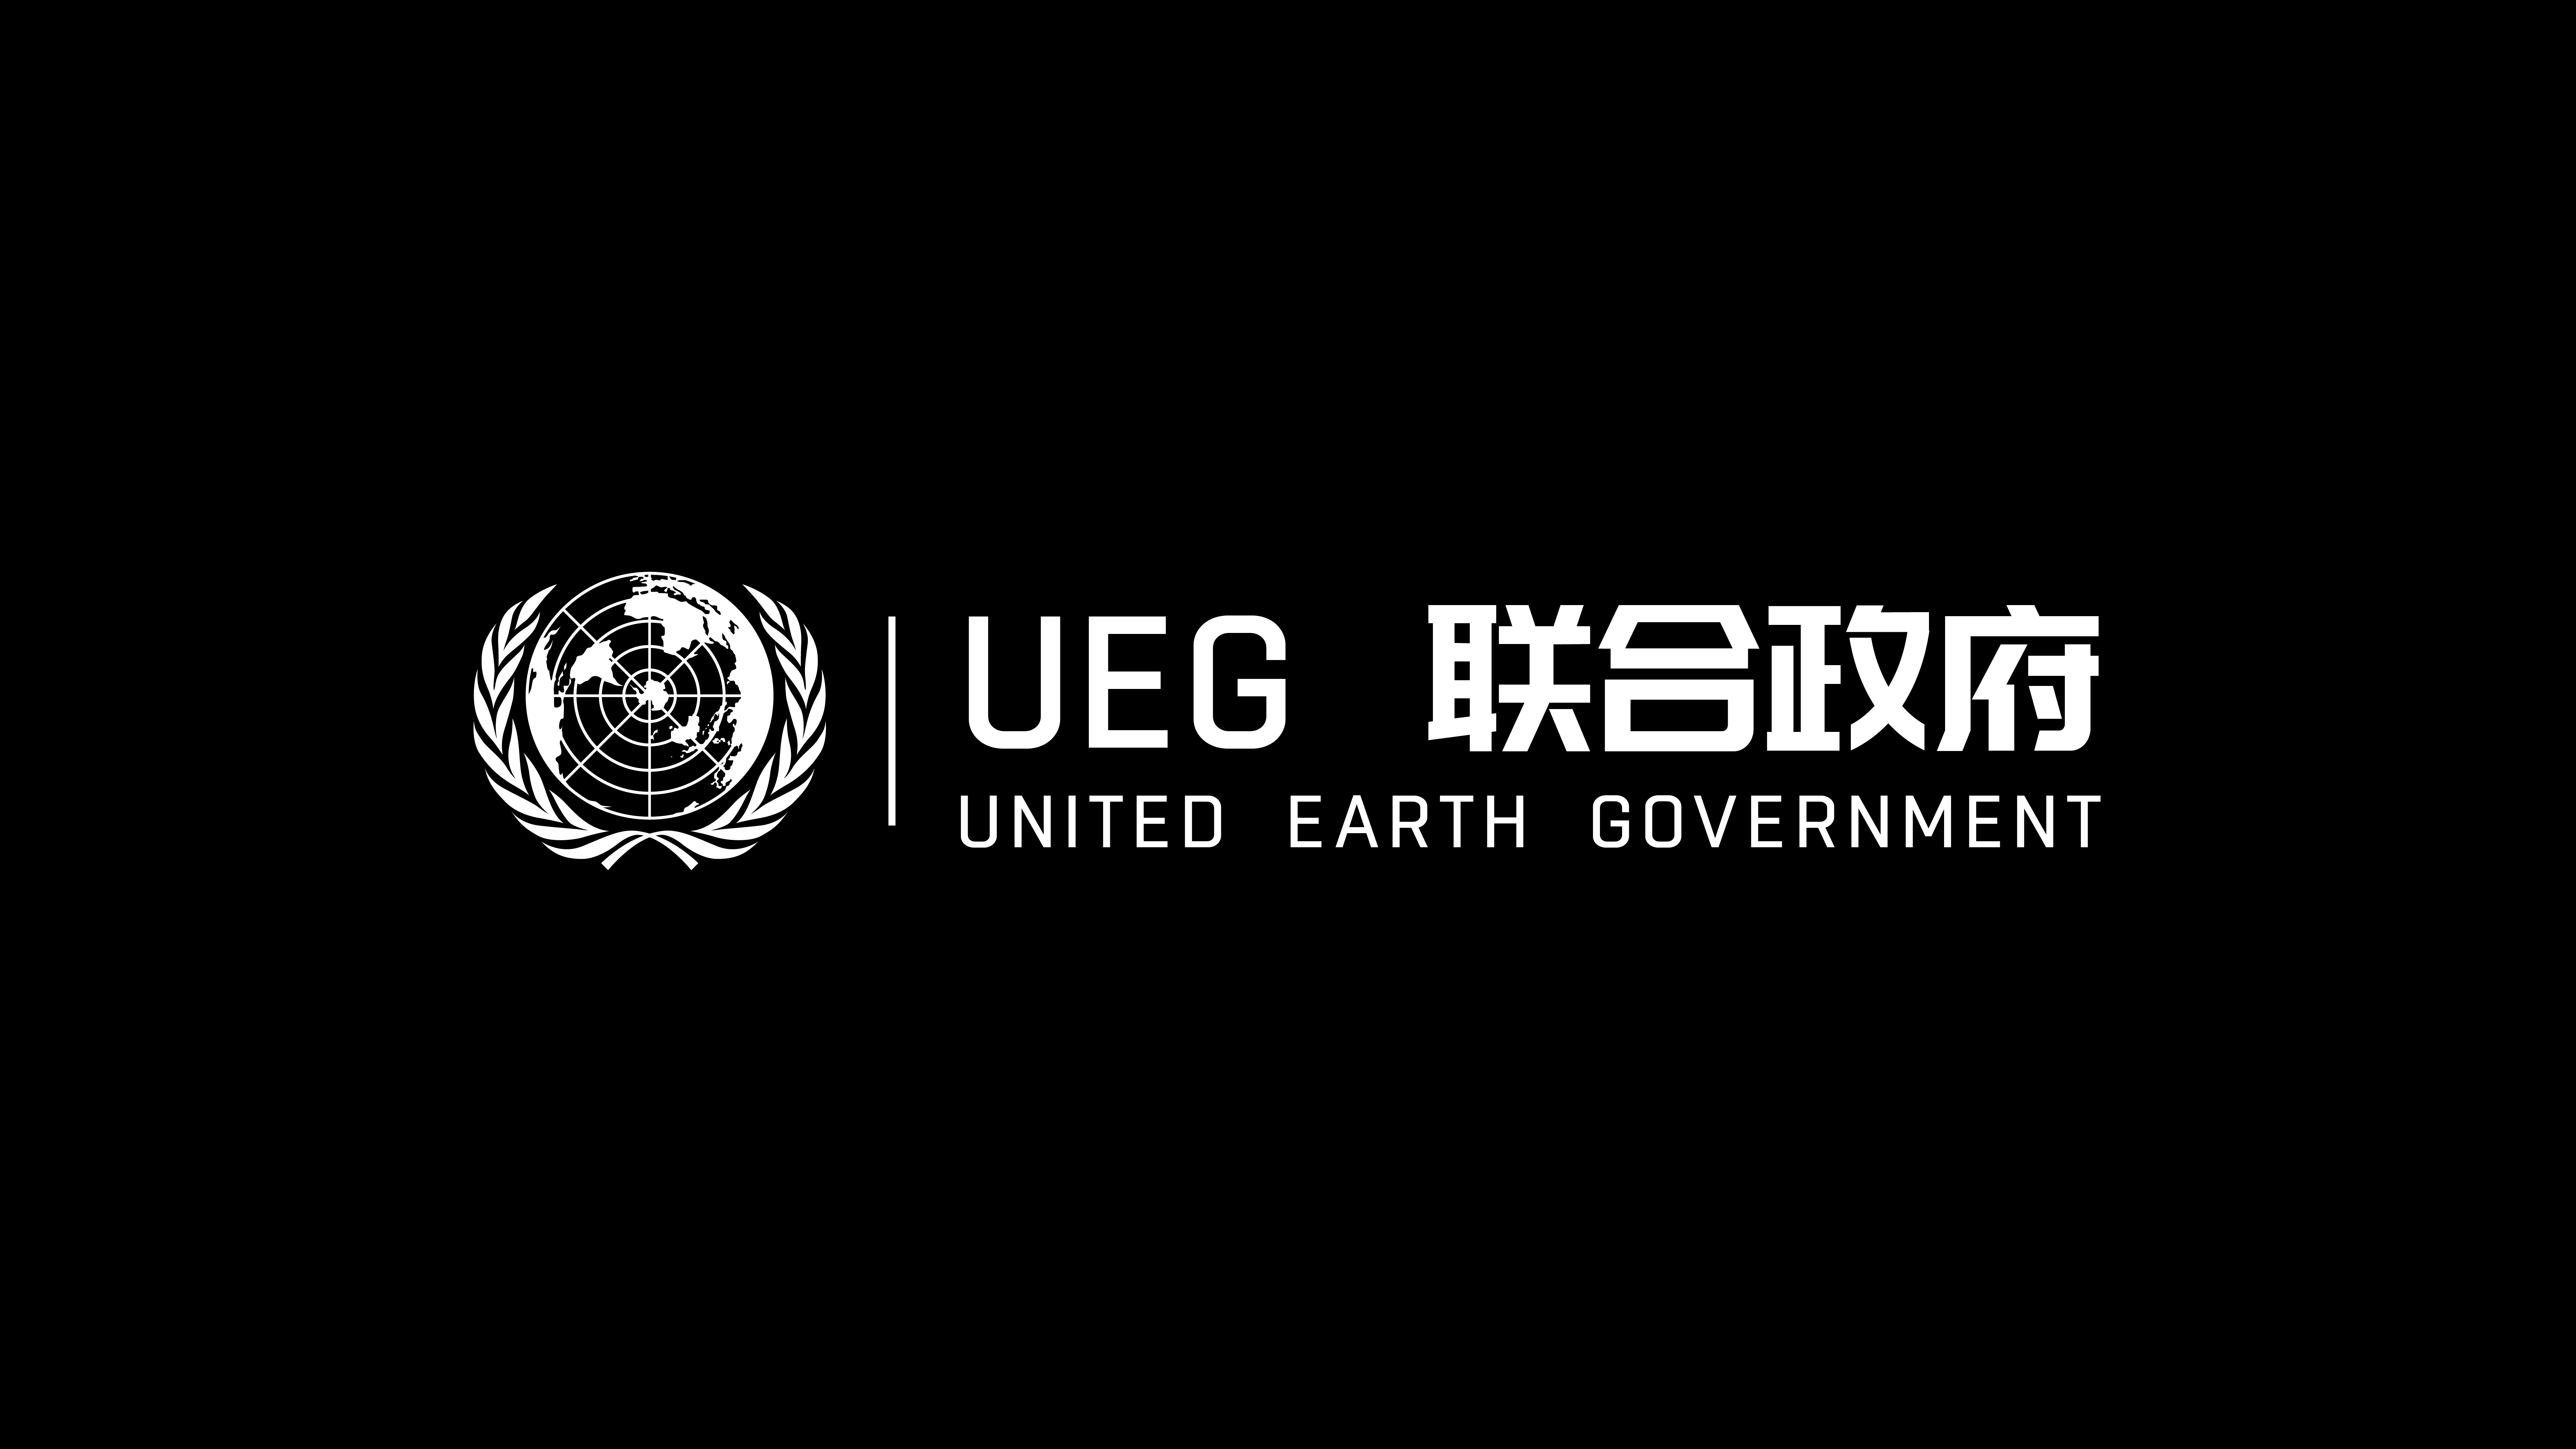 General 7680x4320 The Wandering Earth computer simple background logo black background minimalism